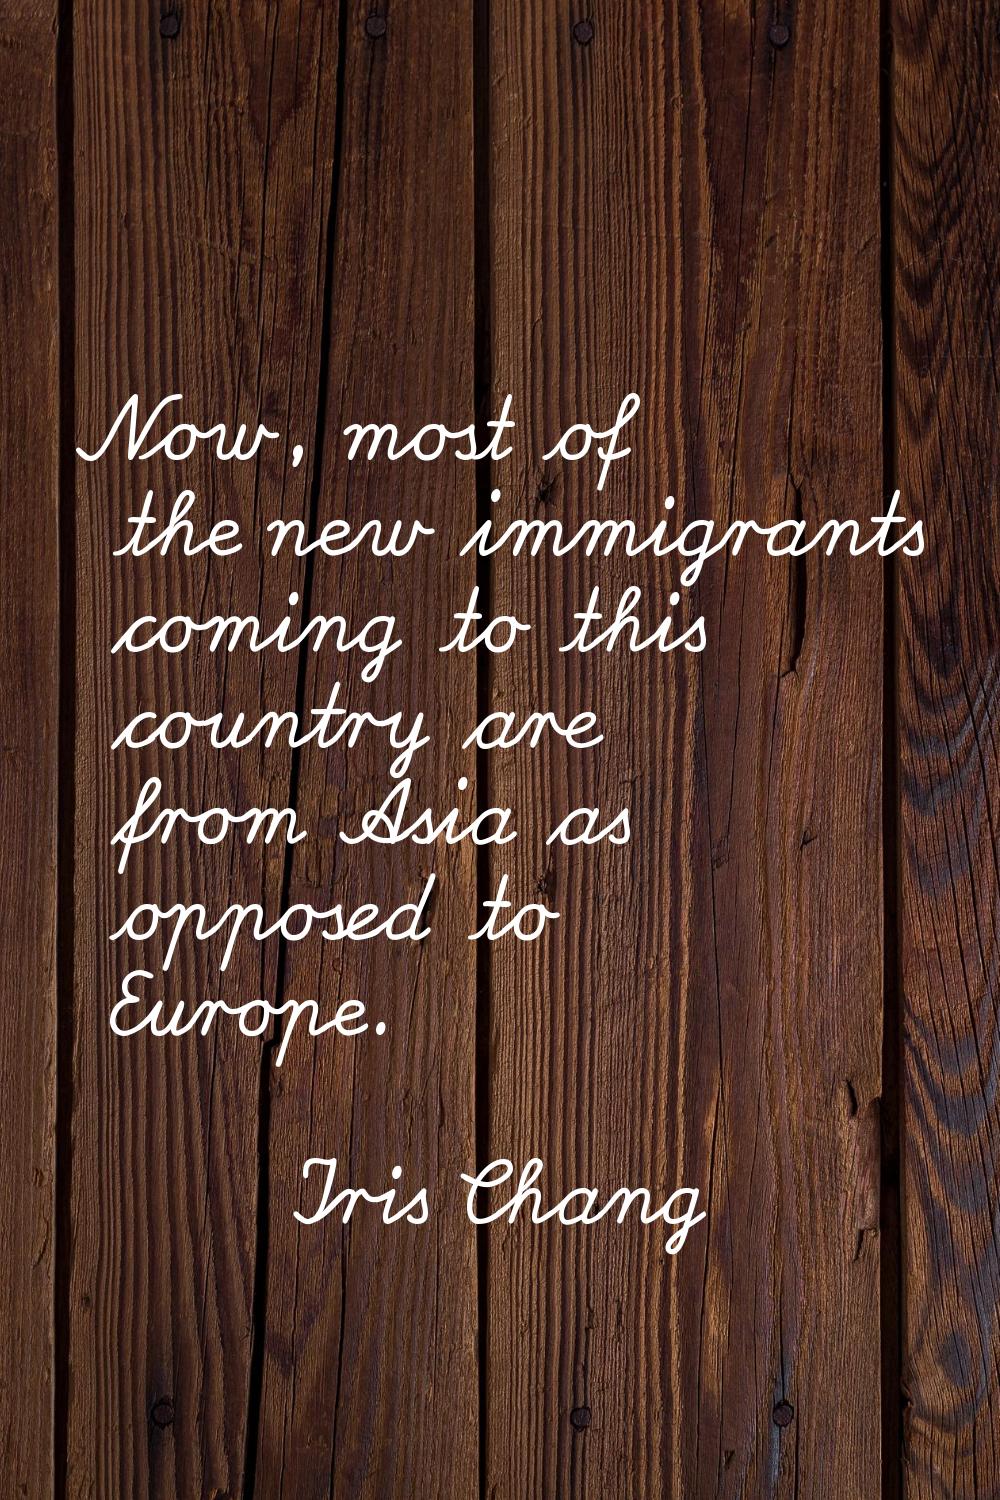 Now, most of the new immigrants coming to this country are from Asia as opposed to Europe.